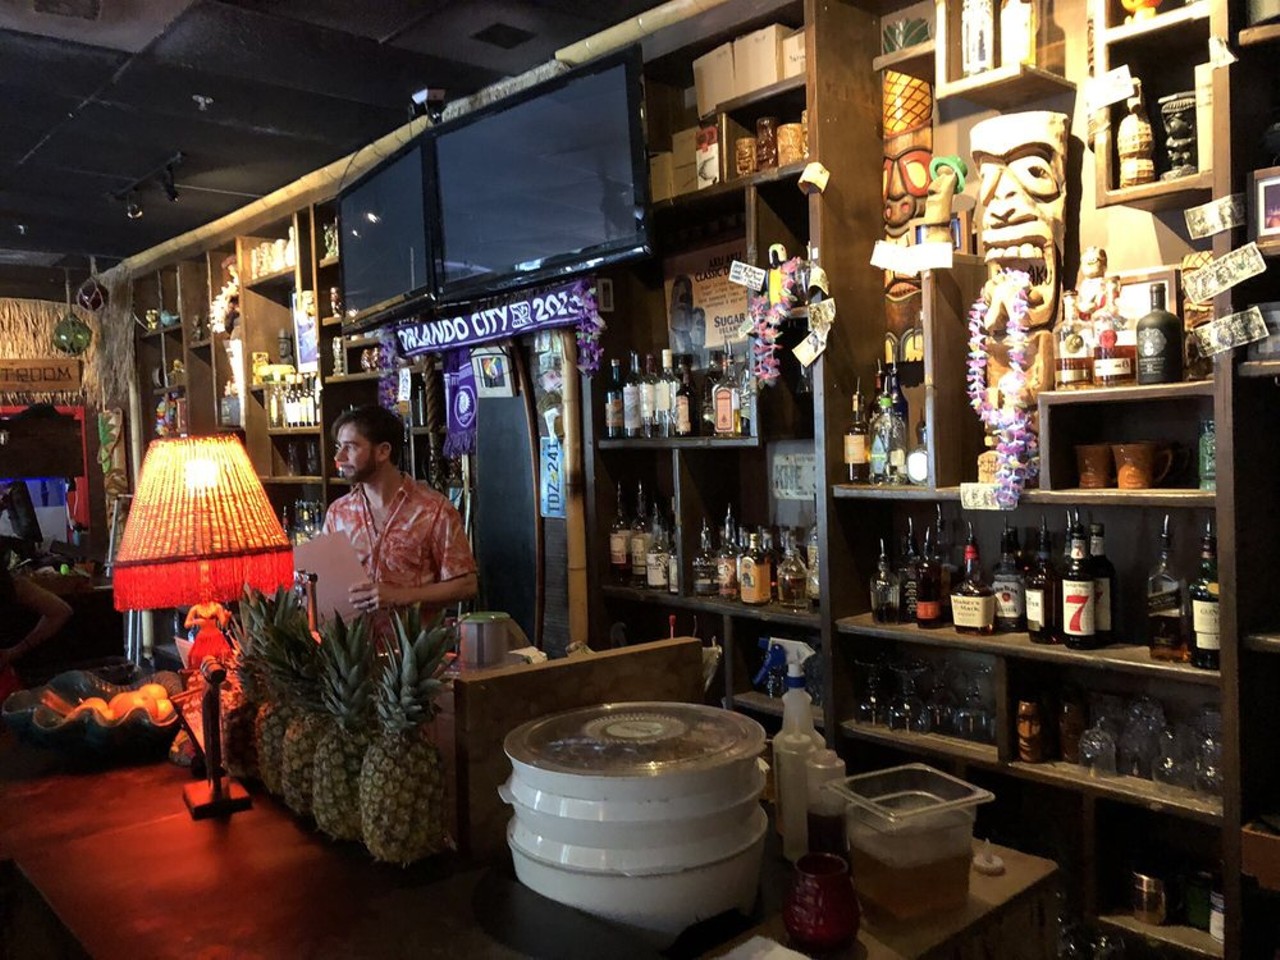 Aku Aku Tiki Bar 
431 E Central Blvd., 407-839-0080
I will be returning to try a couple more of their drinks. I would highly recommend it. - Roxana V.
Photo via Steve A./Yelp